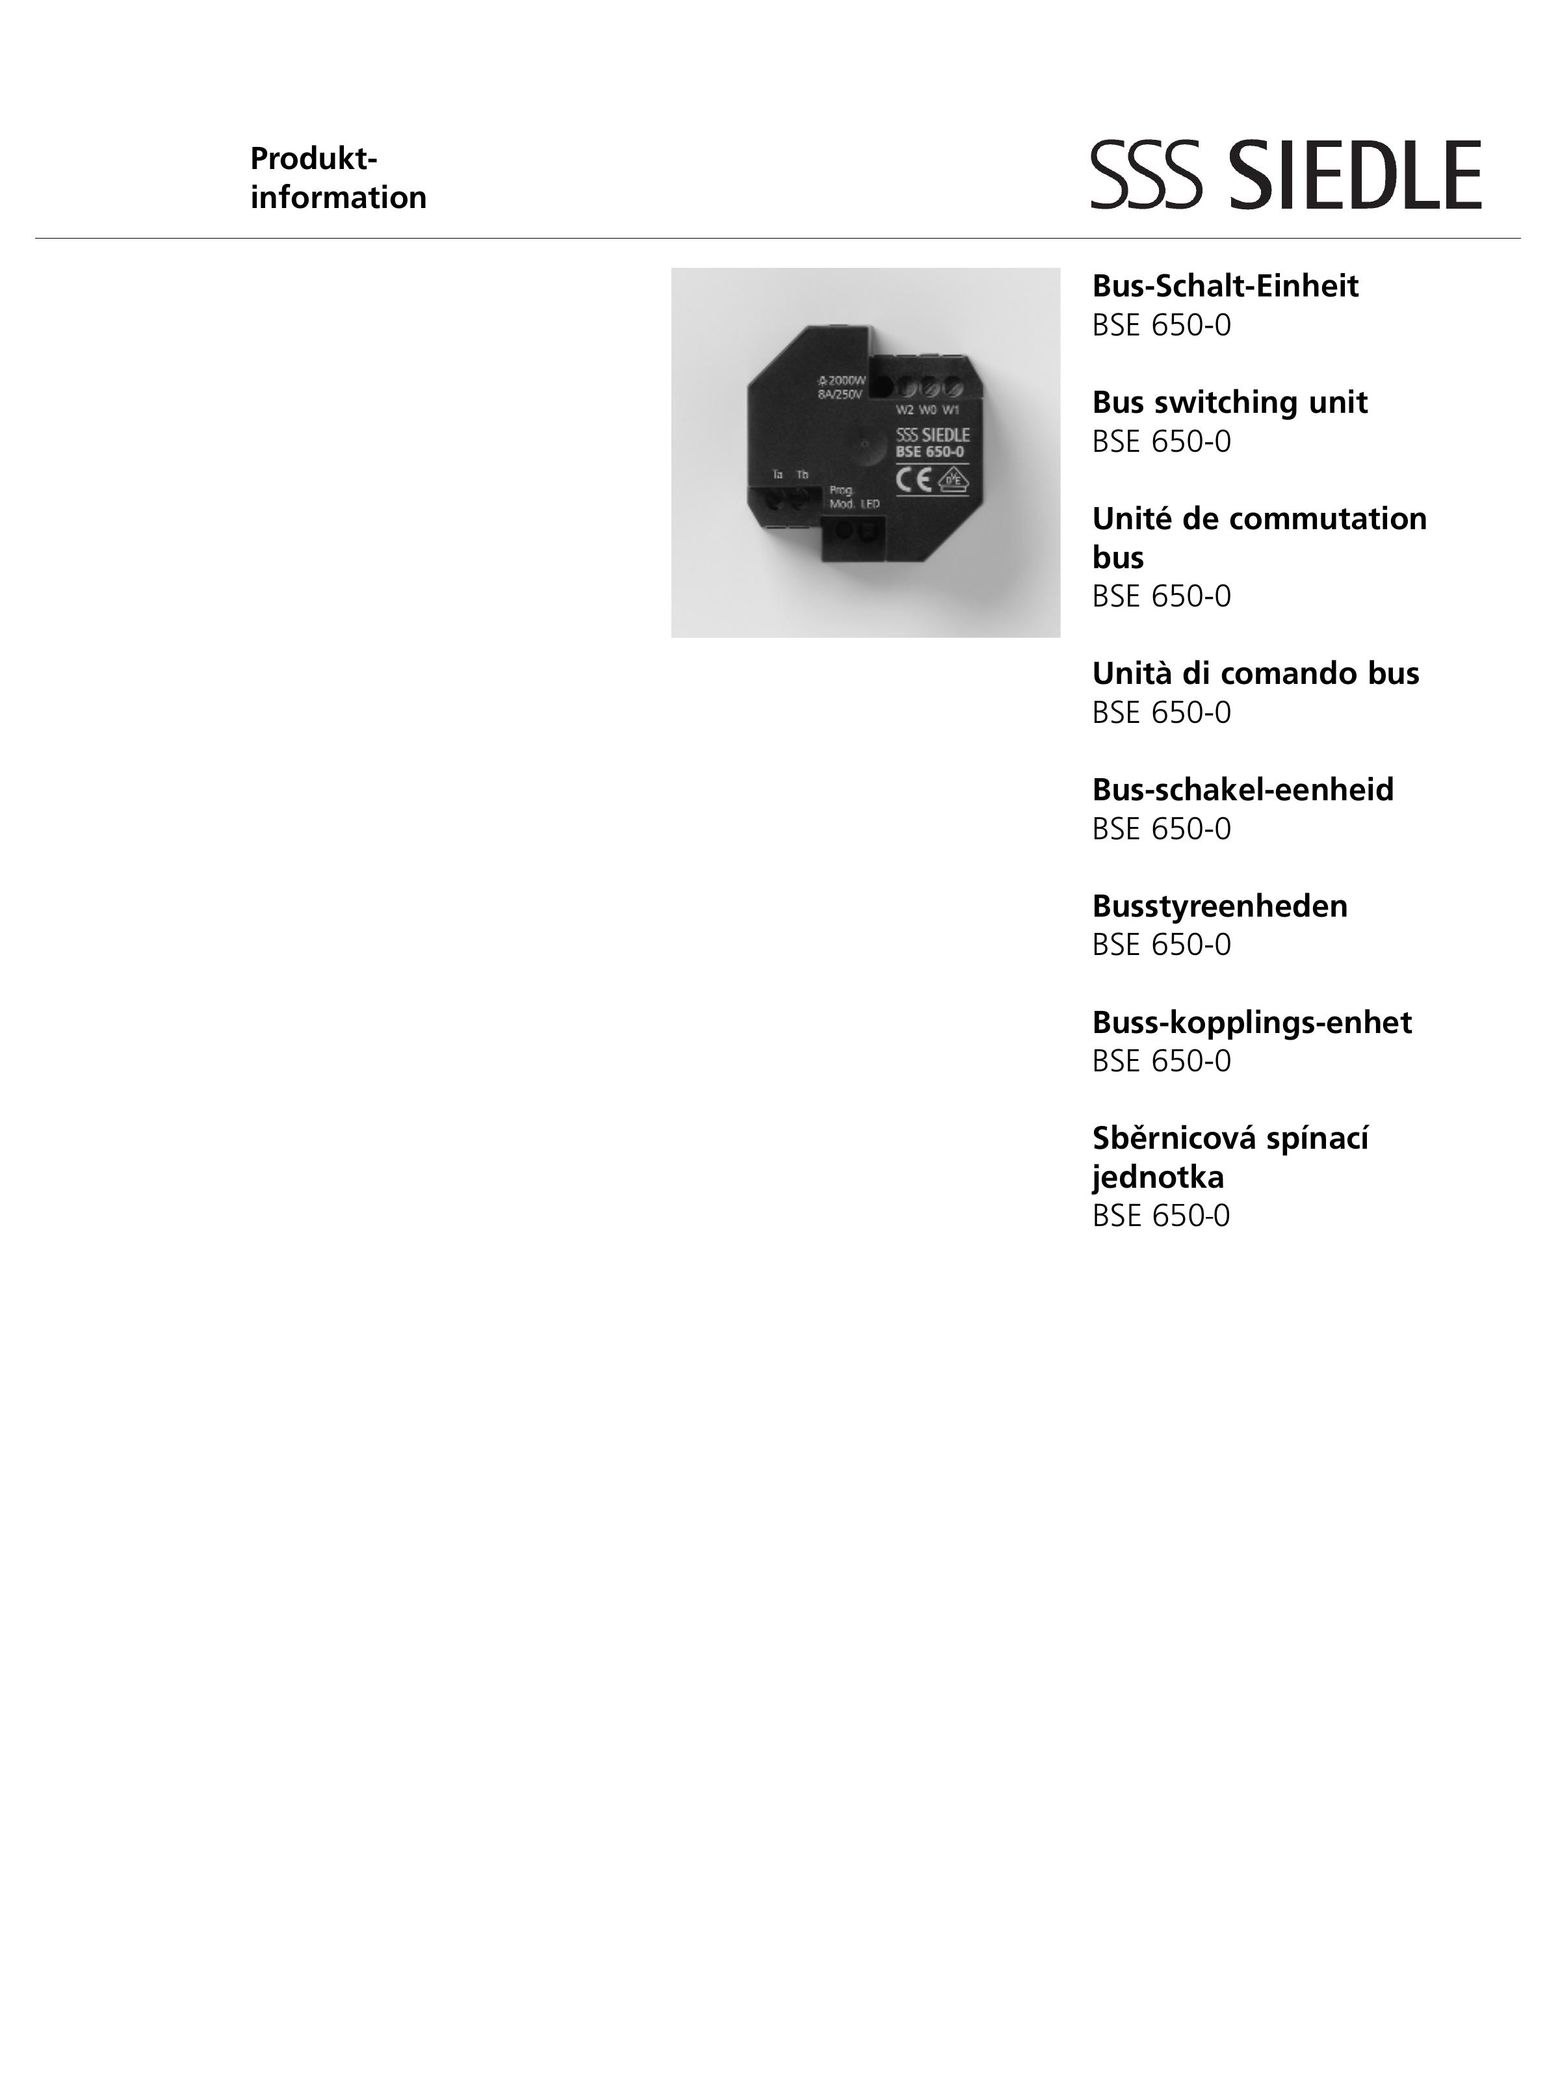 SSS BSE 650-0 Switch User Manual